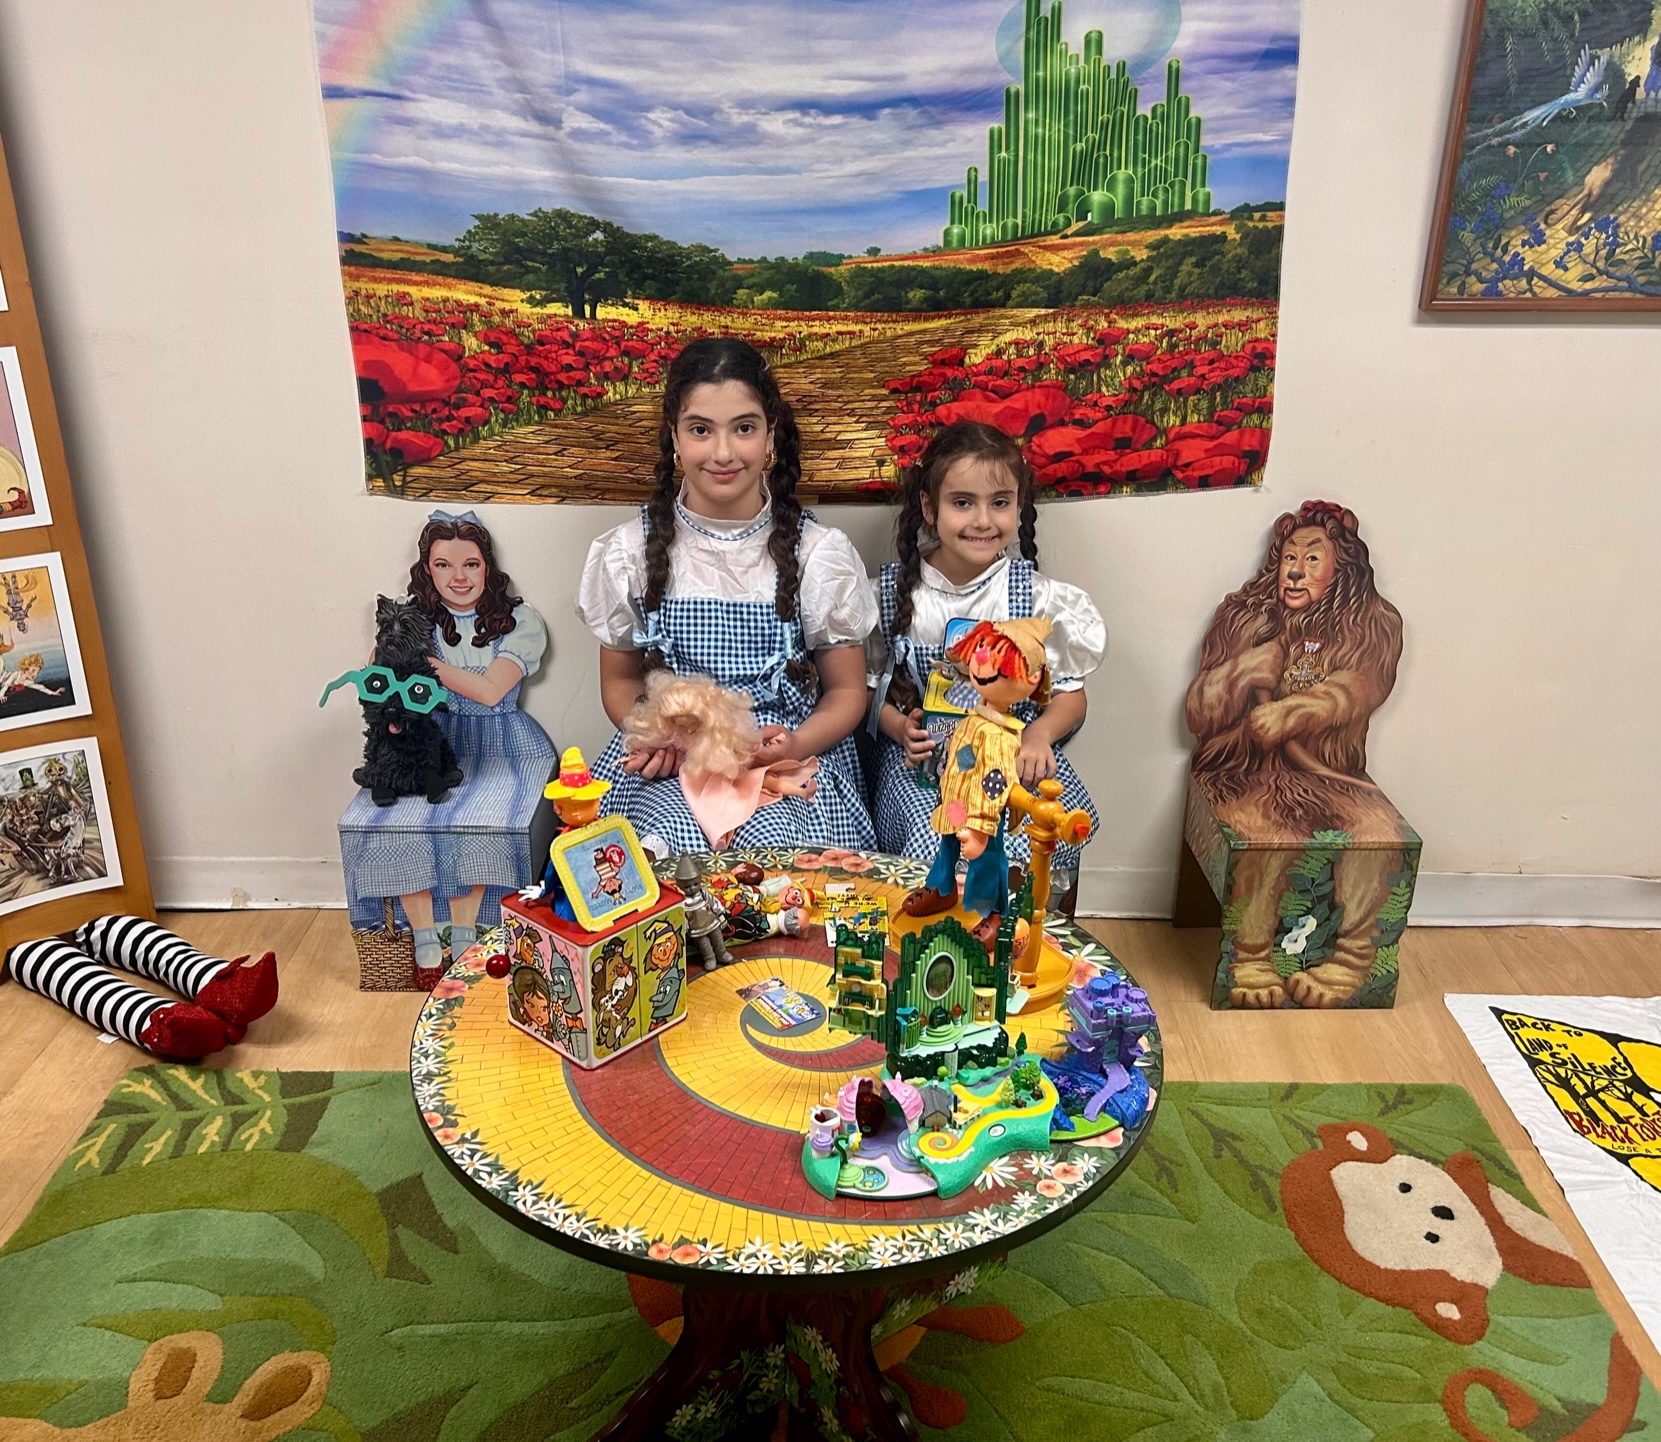 Things To Do in Cocoa Beach  The Wizard of Oz Immersive Museum